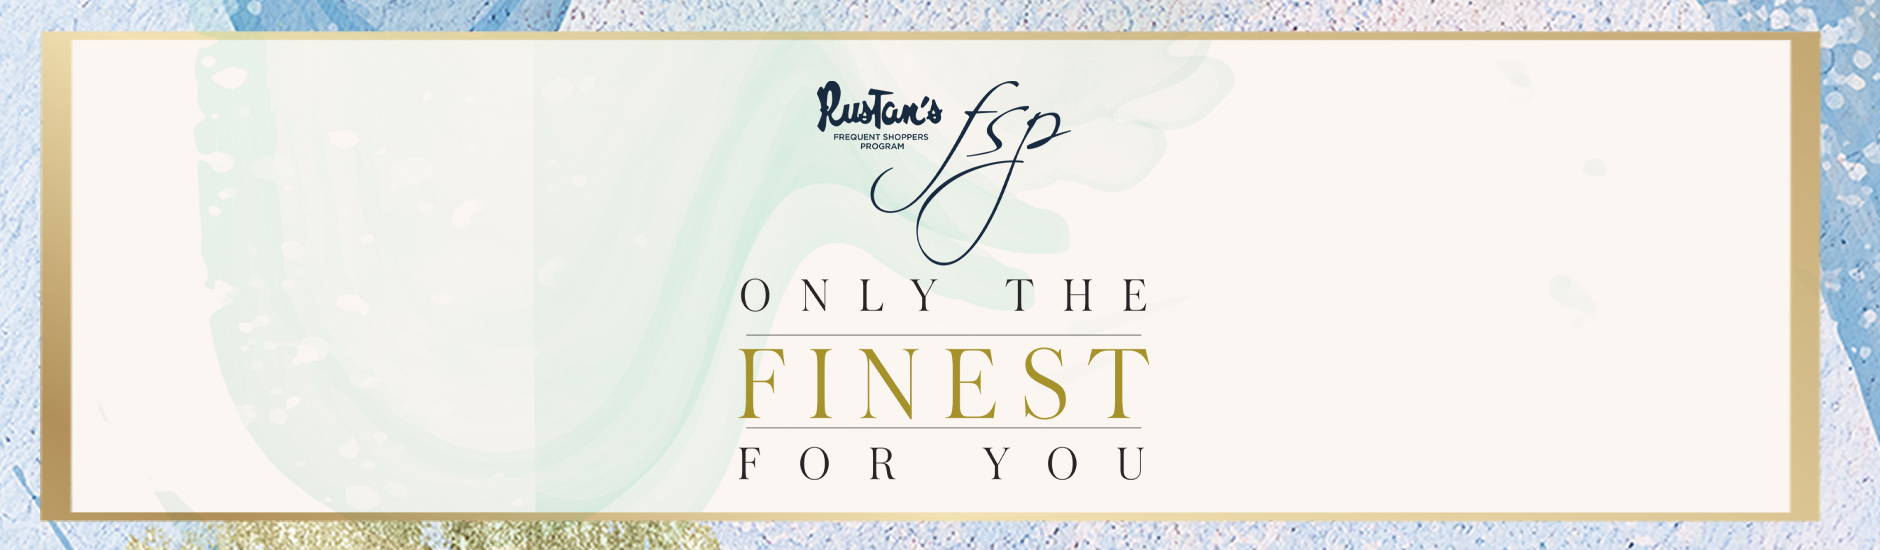 Only The Finest For You - The Finest Finds